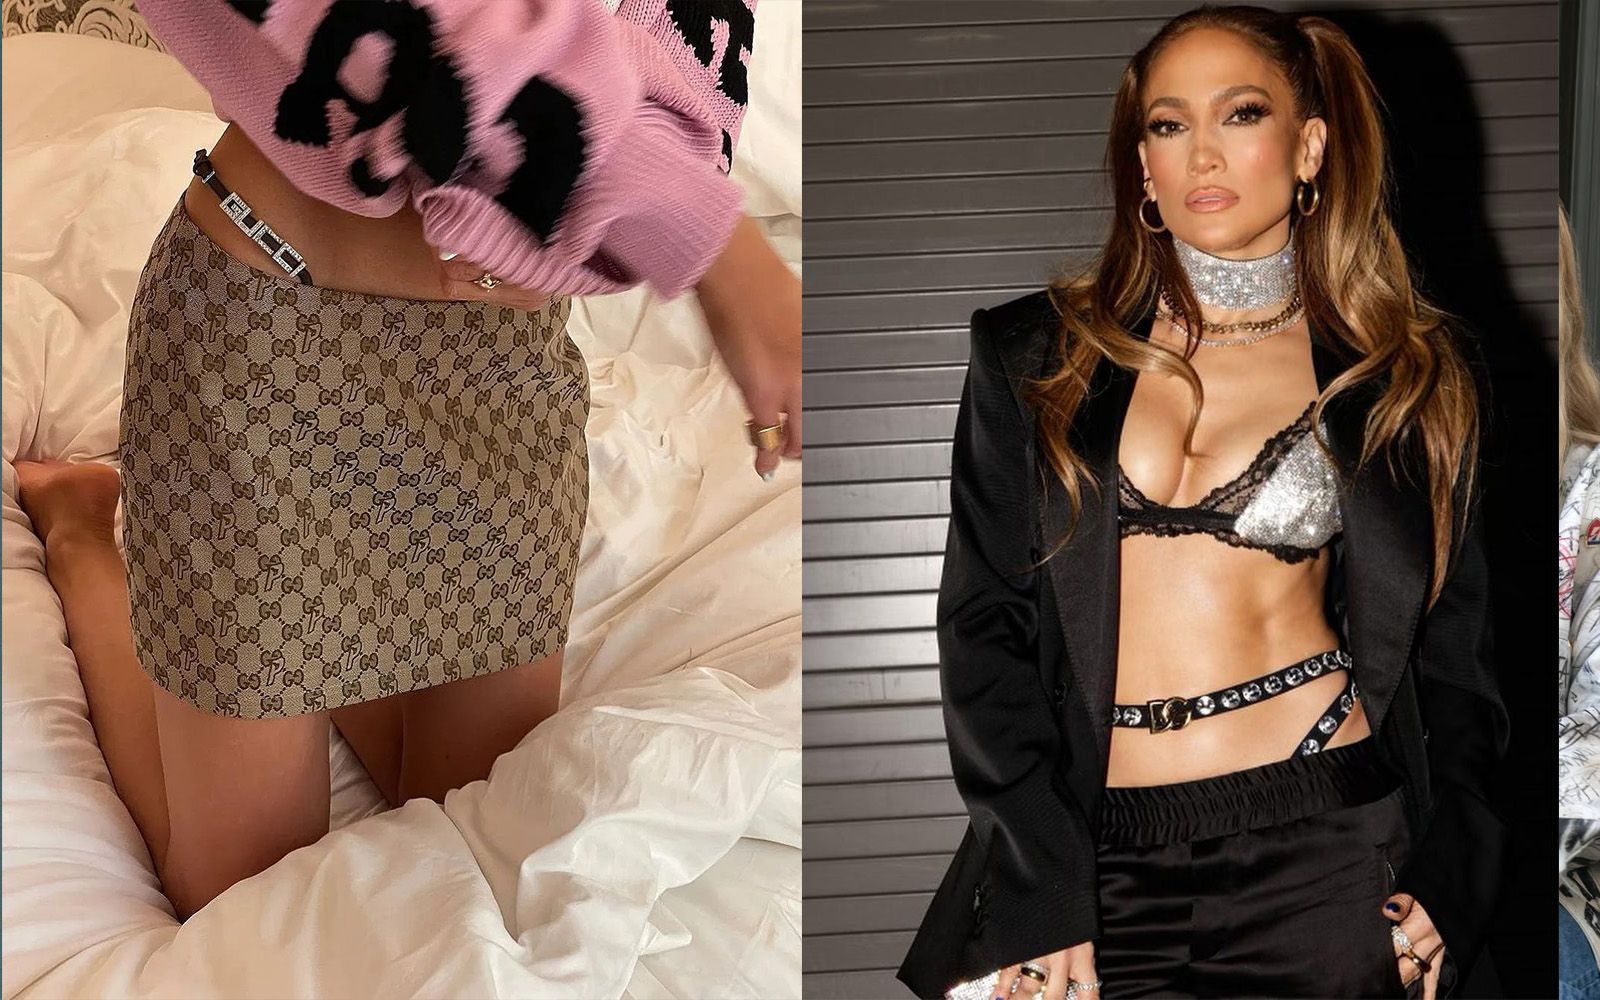 The Exposed Thong Trend Is Back and Better Than Ever